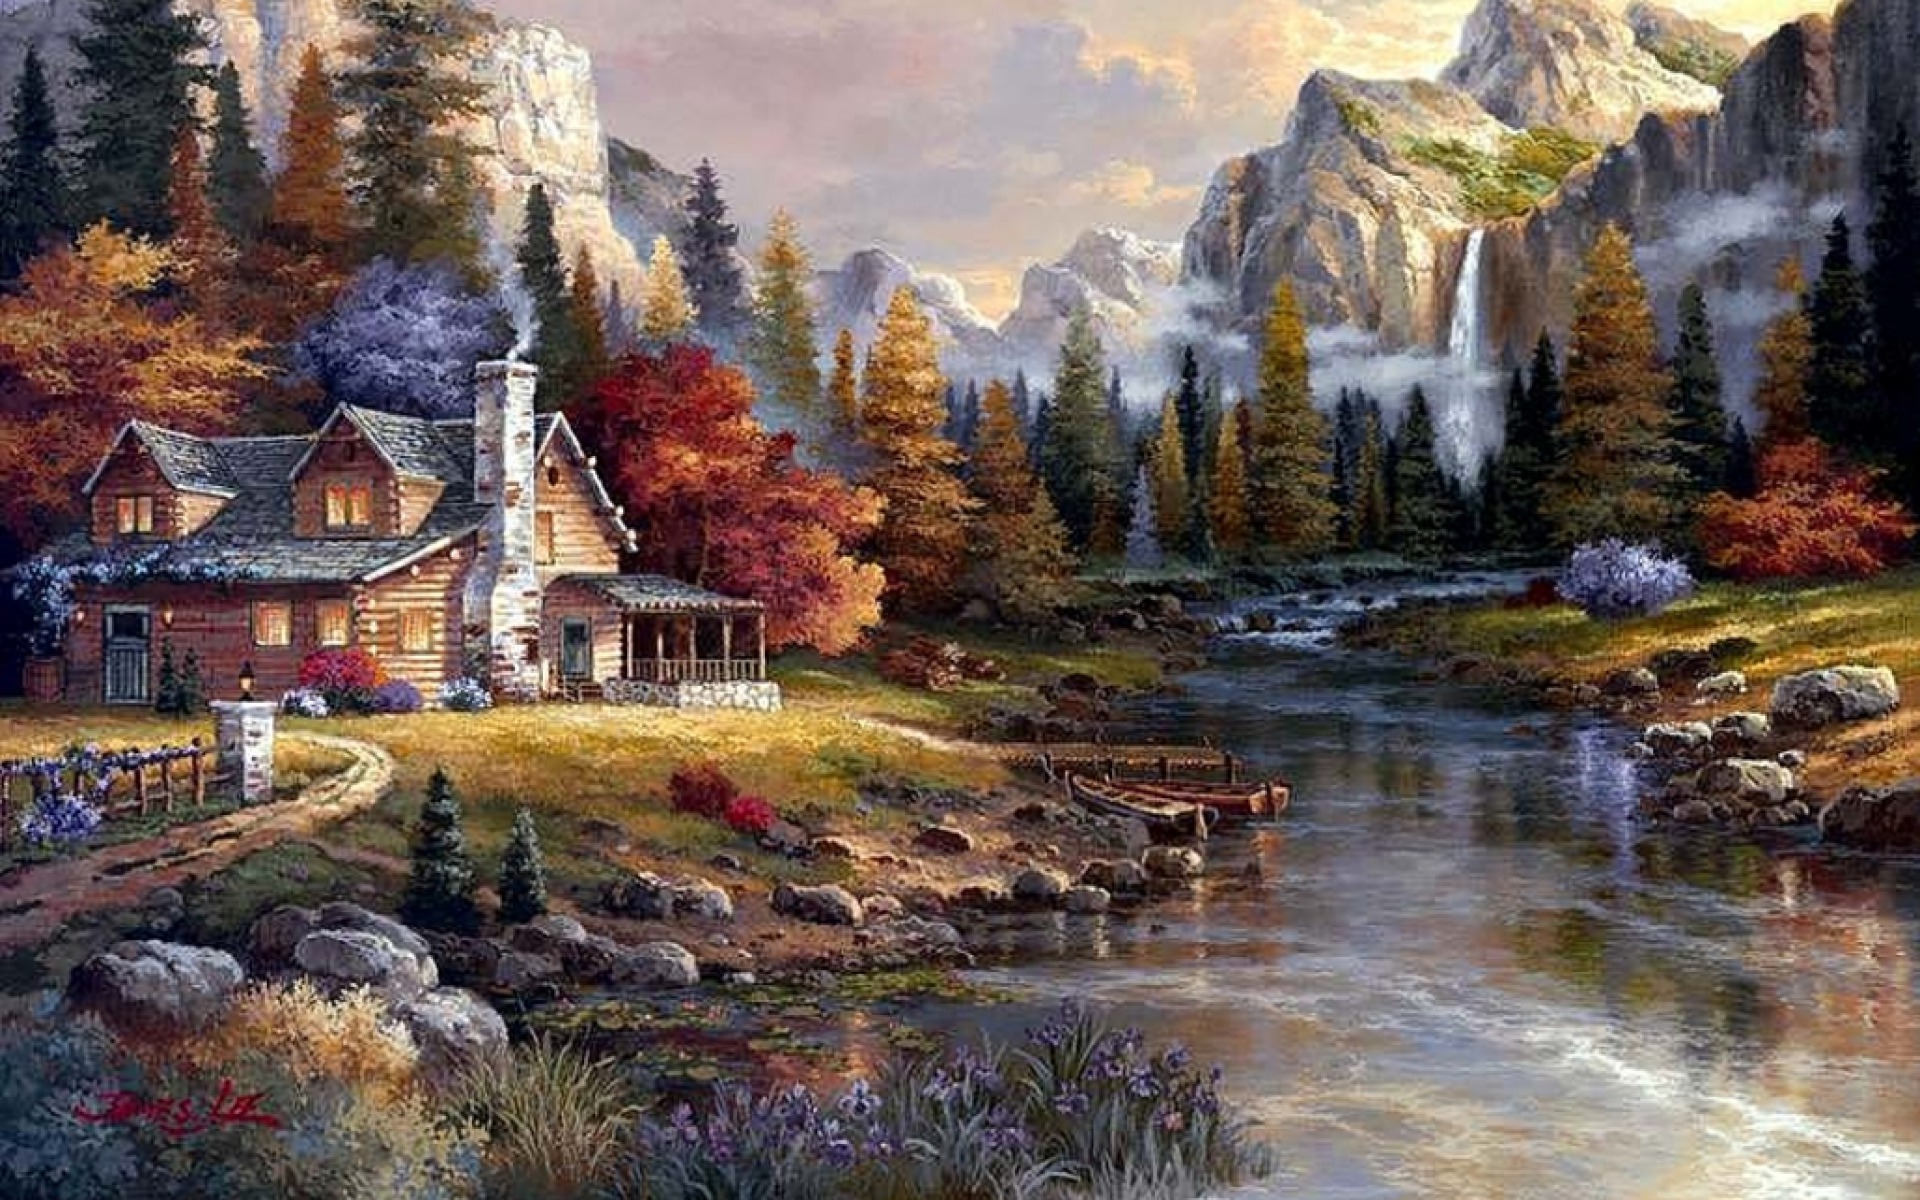 Holiday Cottage Pretty Scenery Wallpaper